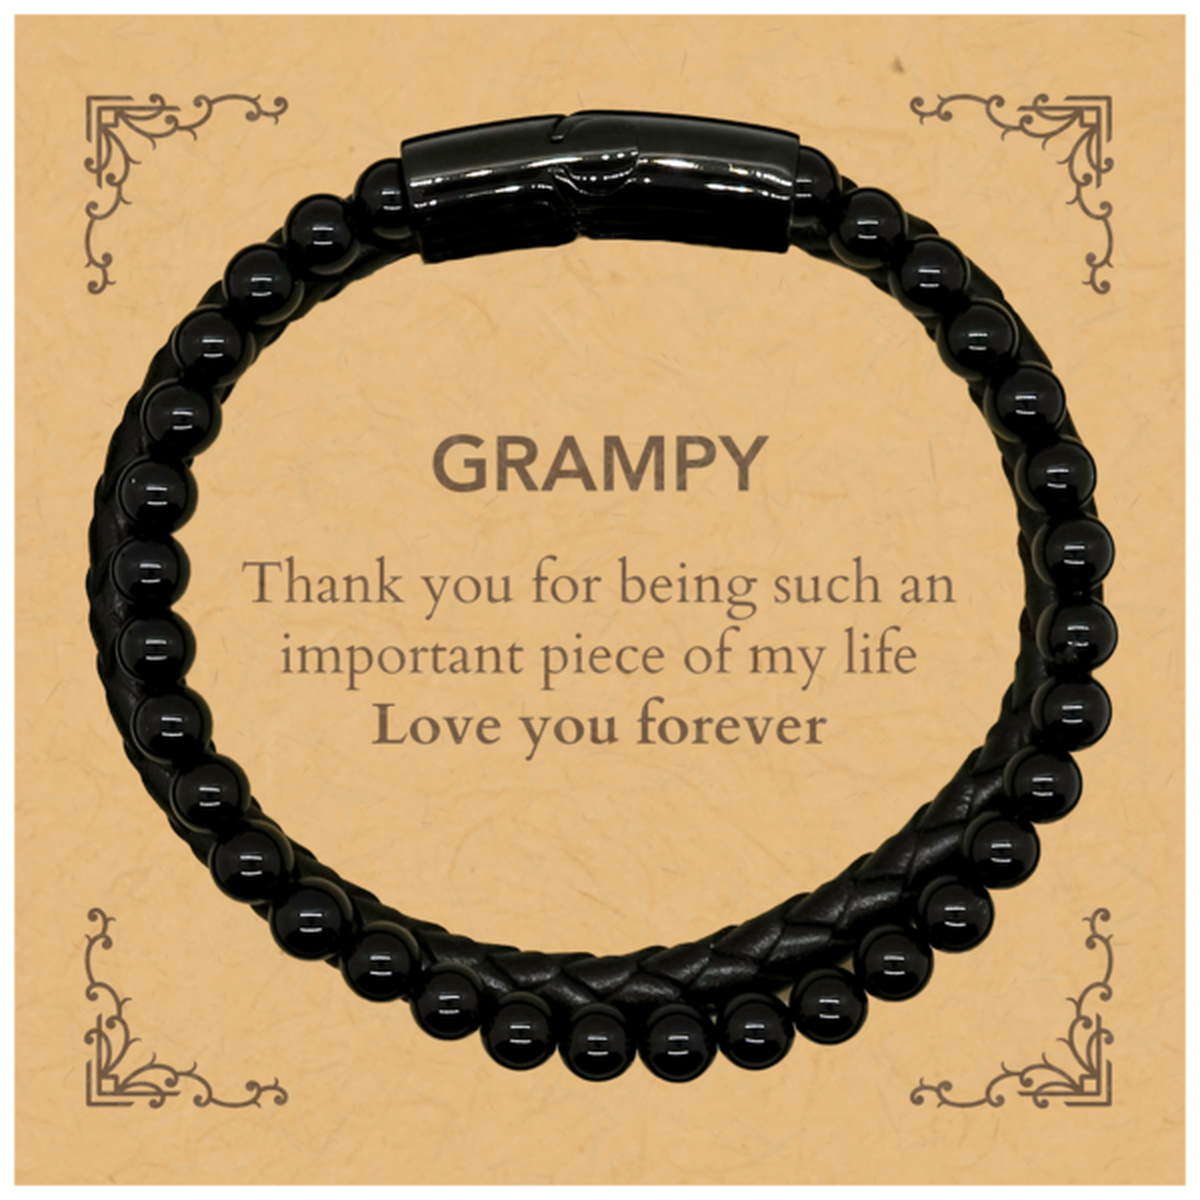 Appropriate Grampy Stone Leather Bracelets Epic Birthday Gifts for Grampy Thank you for being such an important piece of my life Grampy Christmas Mothers Fathers Day